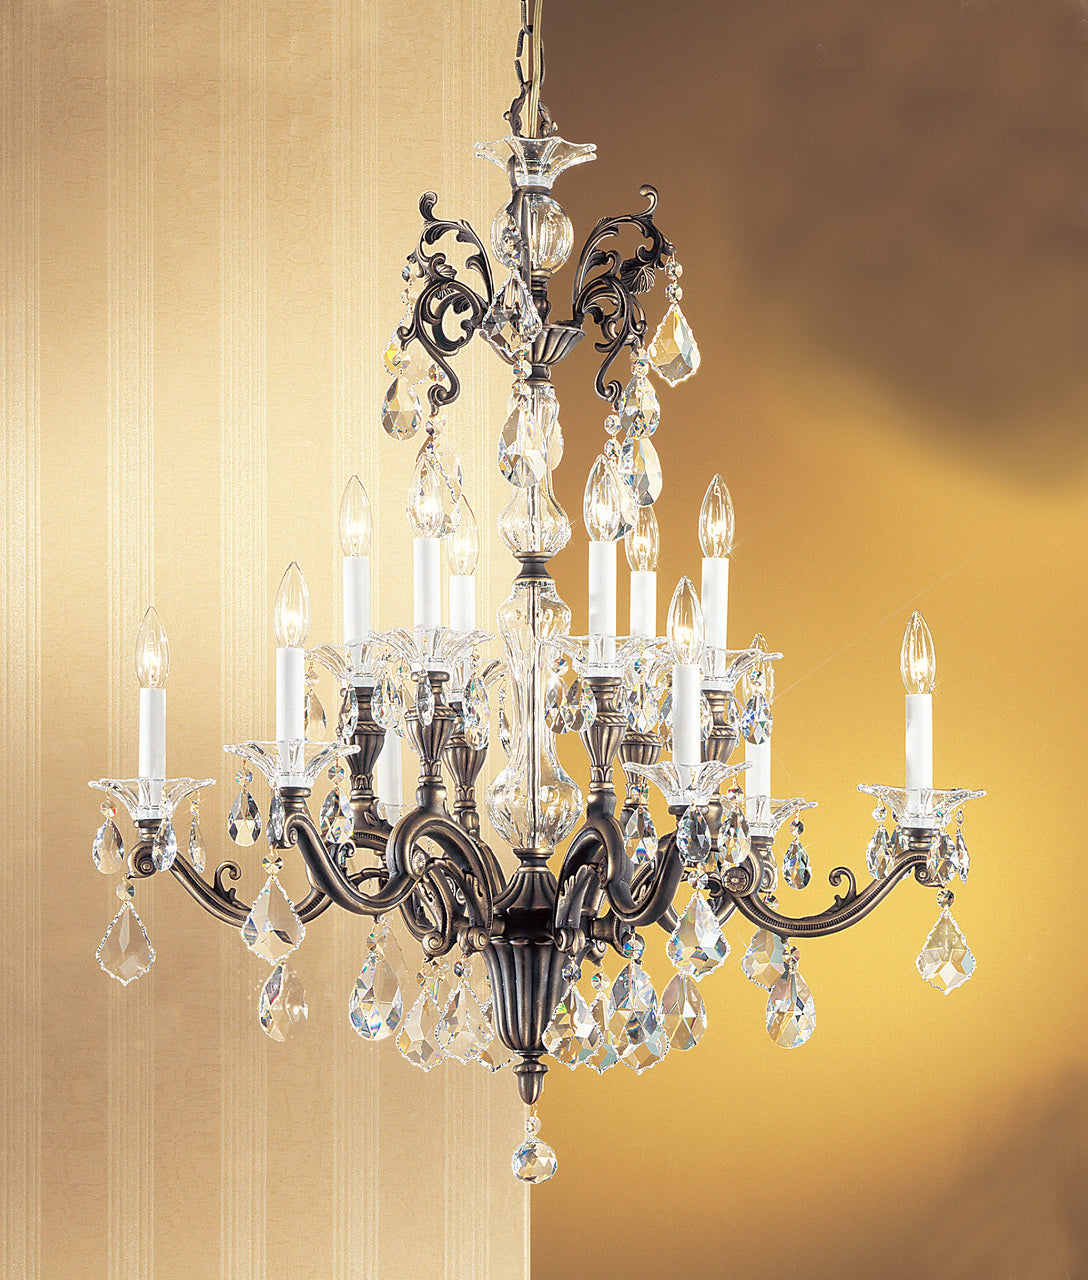 Classic Lighting 57112 RB C Via Firenze Crystal Chandelier in Roman Bronze (Imported from Spain)